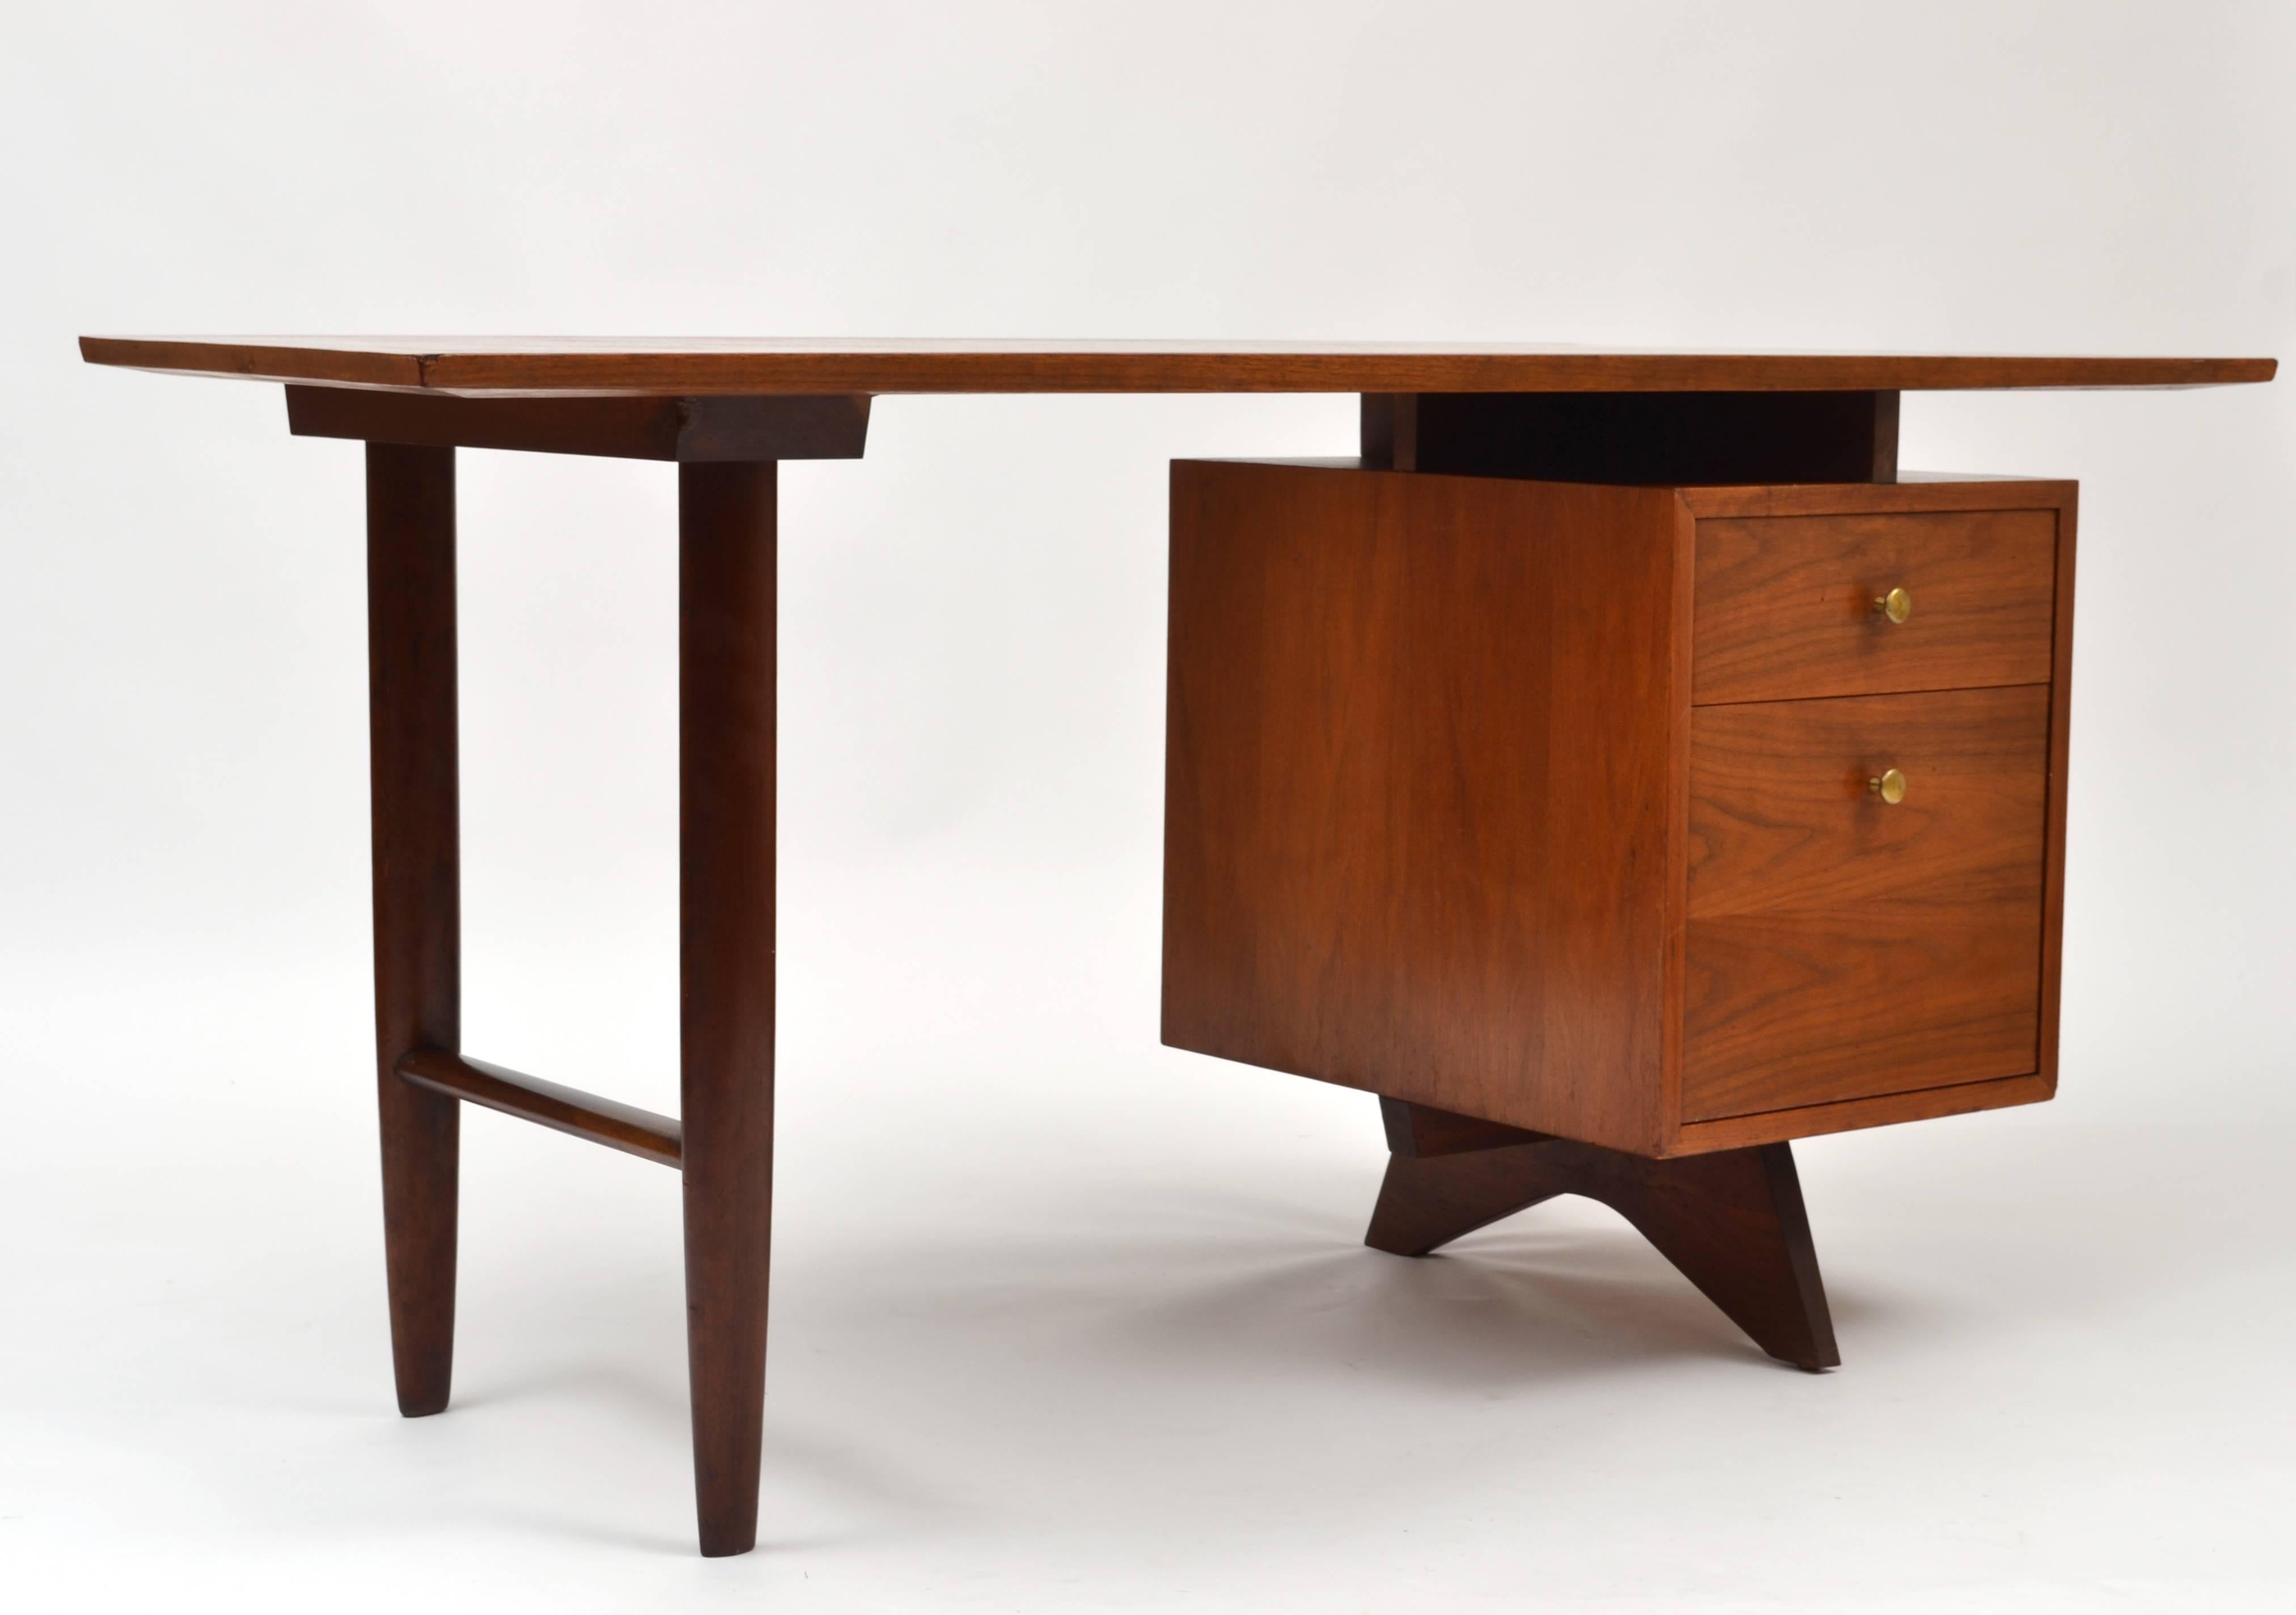 Classic, early George Nakashima desk designed for Widdicomb's Orgin Collection.